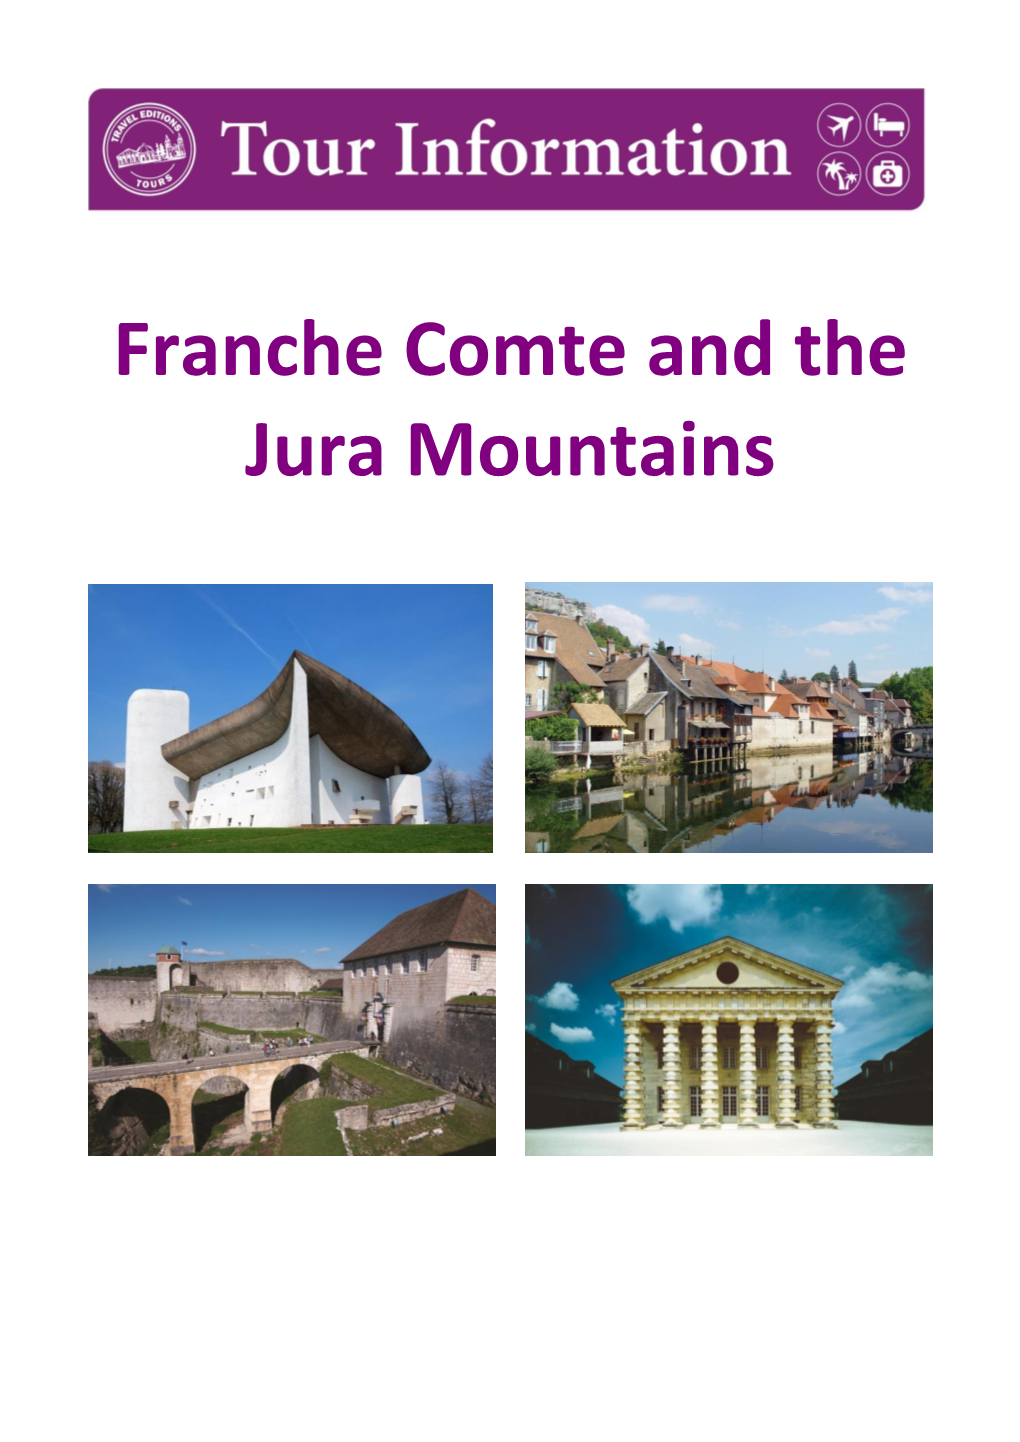 Franche Comte and the Jura Mountains